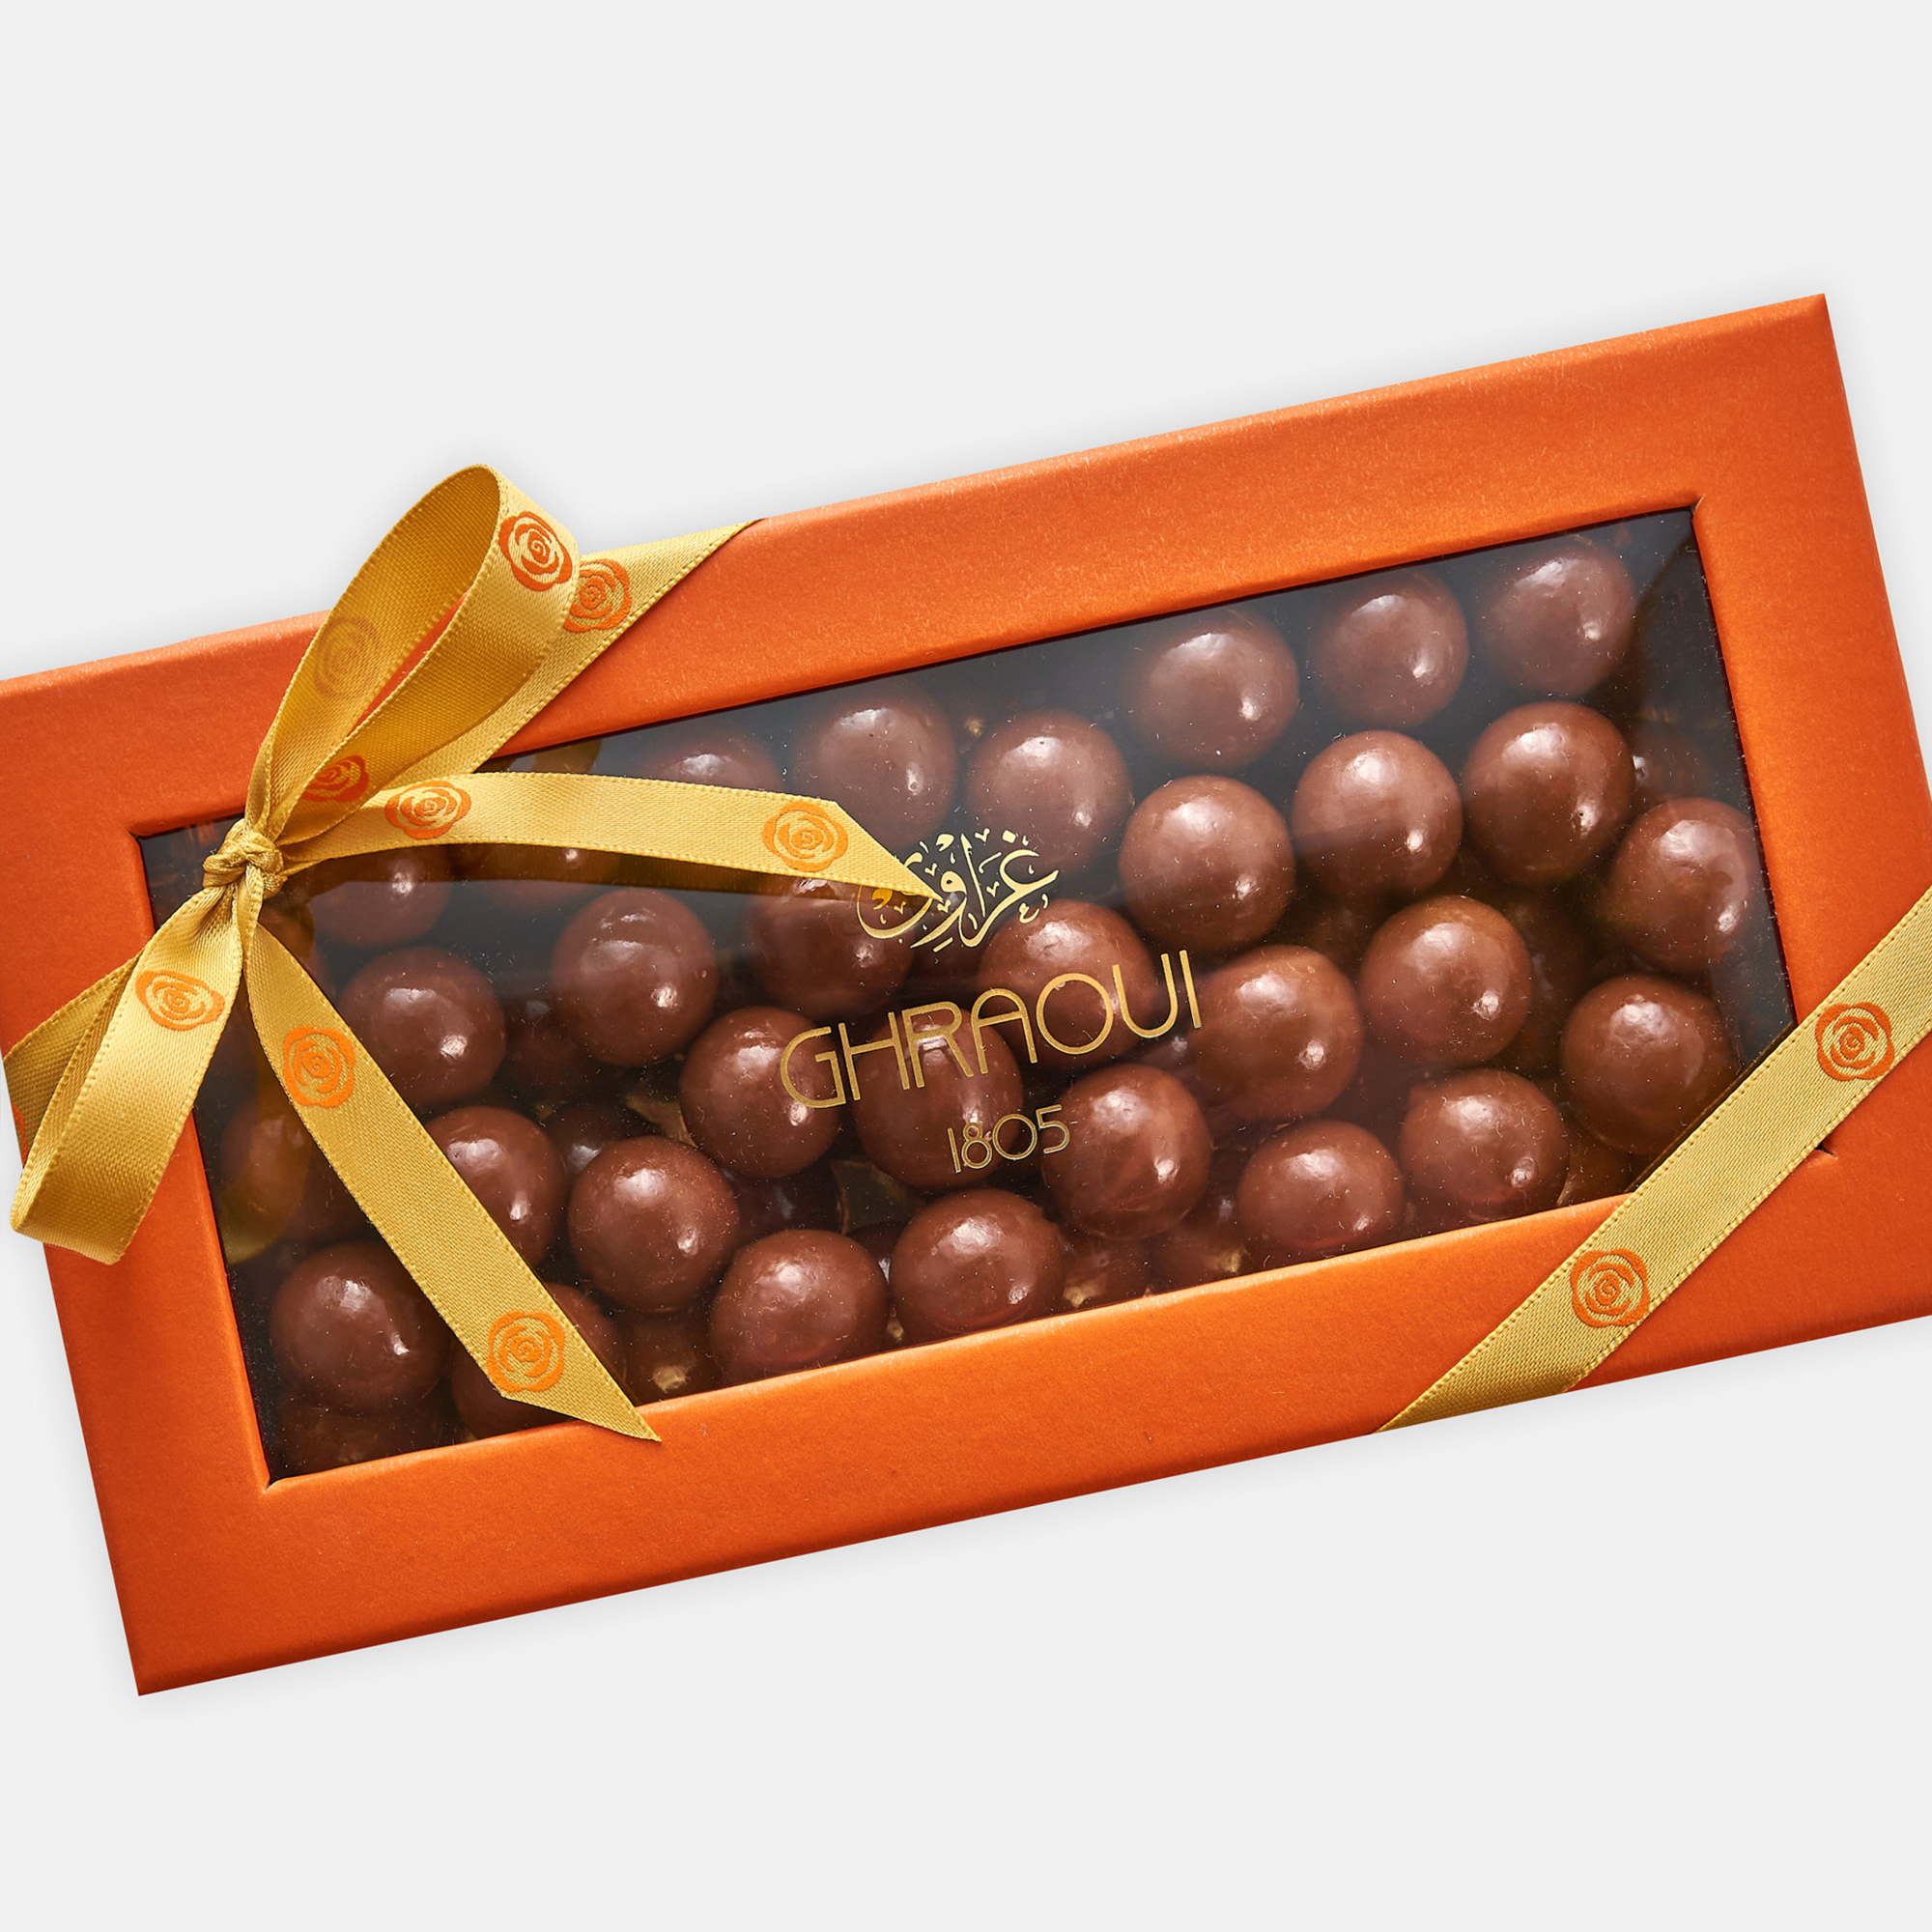 Caramelized nuts coated with milk chocolate 200g - ghraoui-chocolate